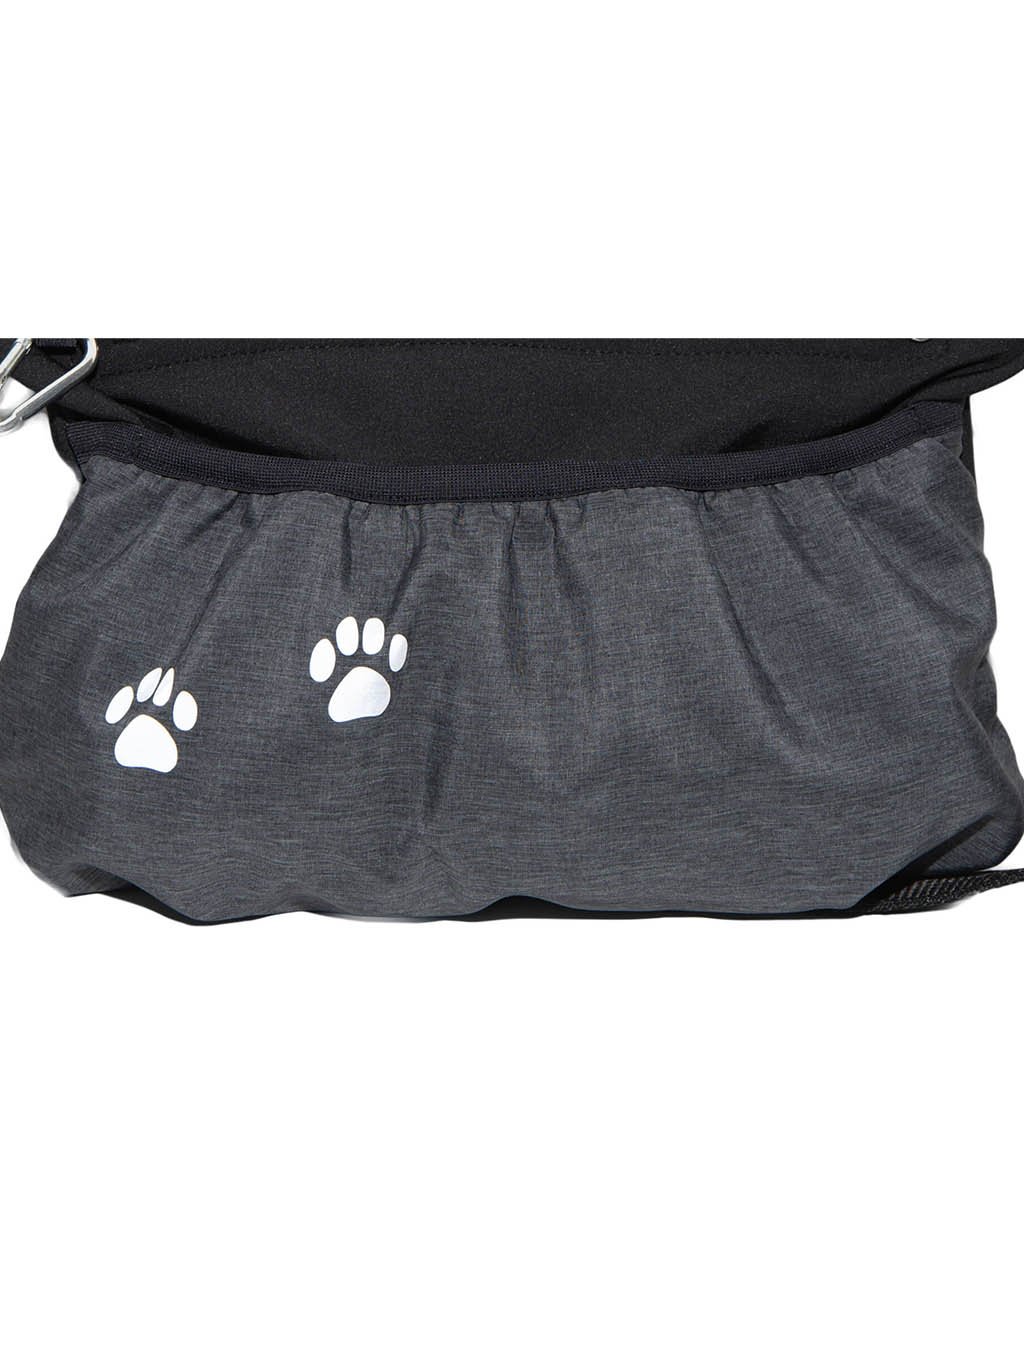 Dog training treat pouch XL anthracite REFLEXIVE PAW